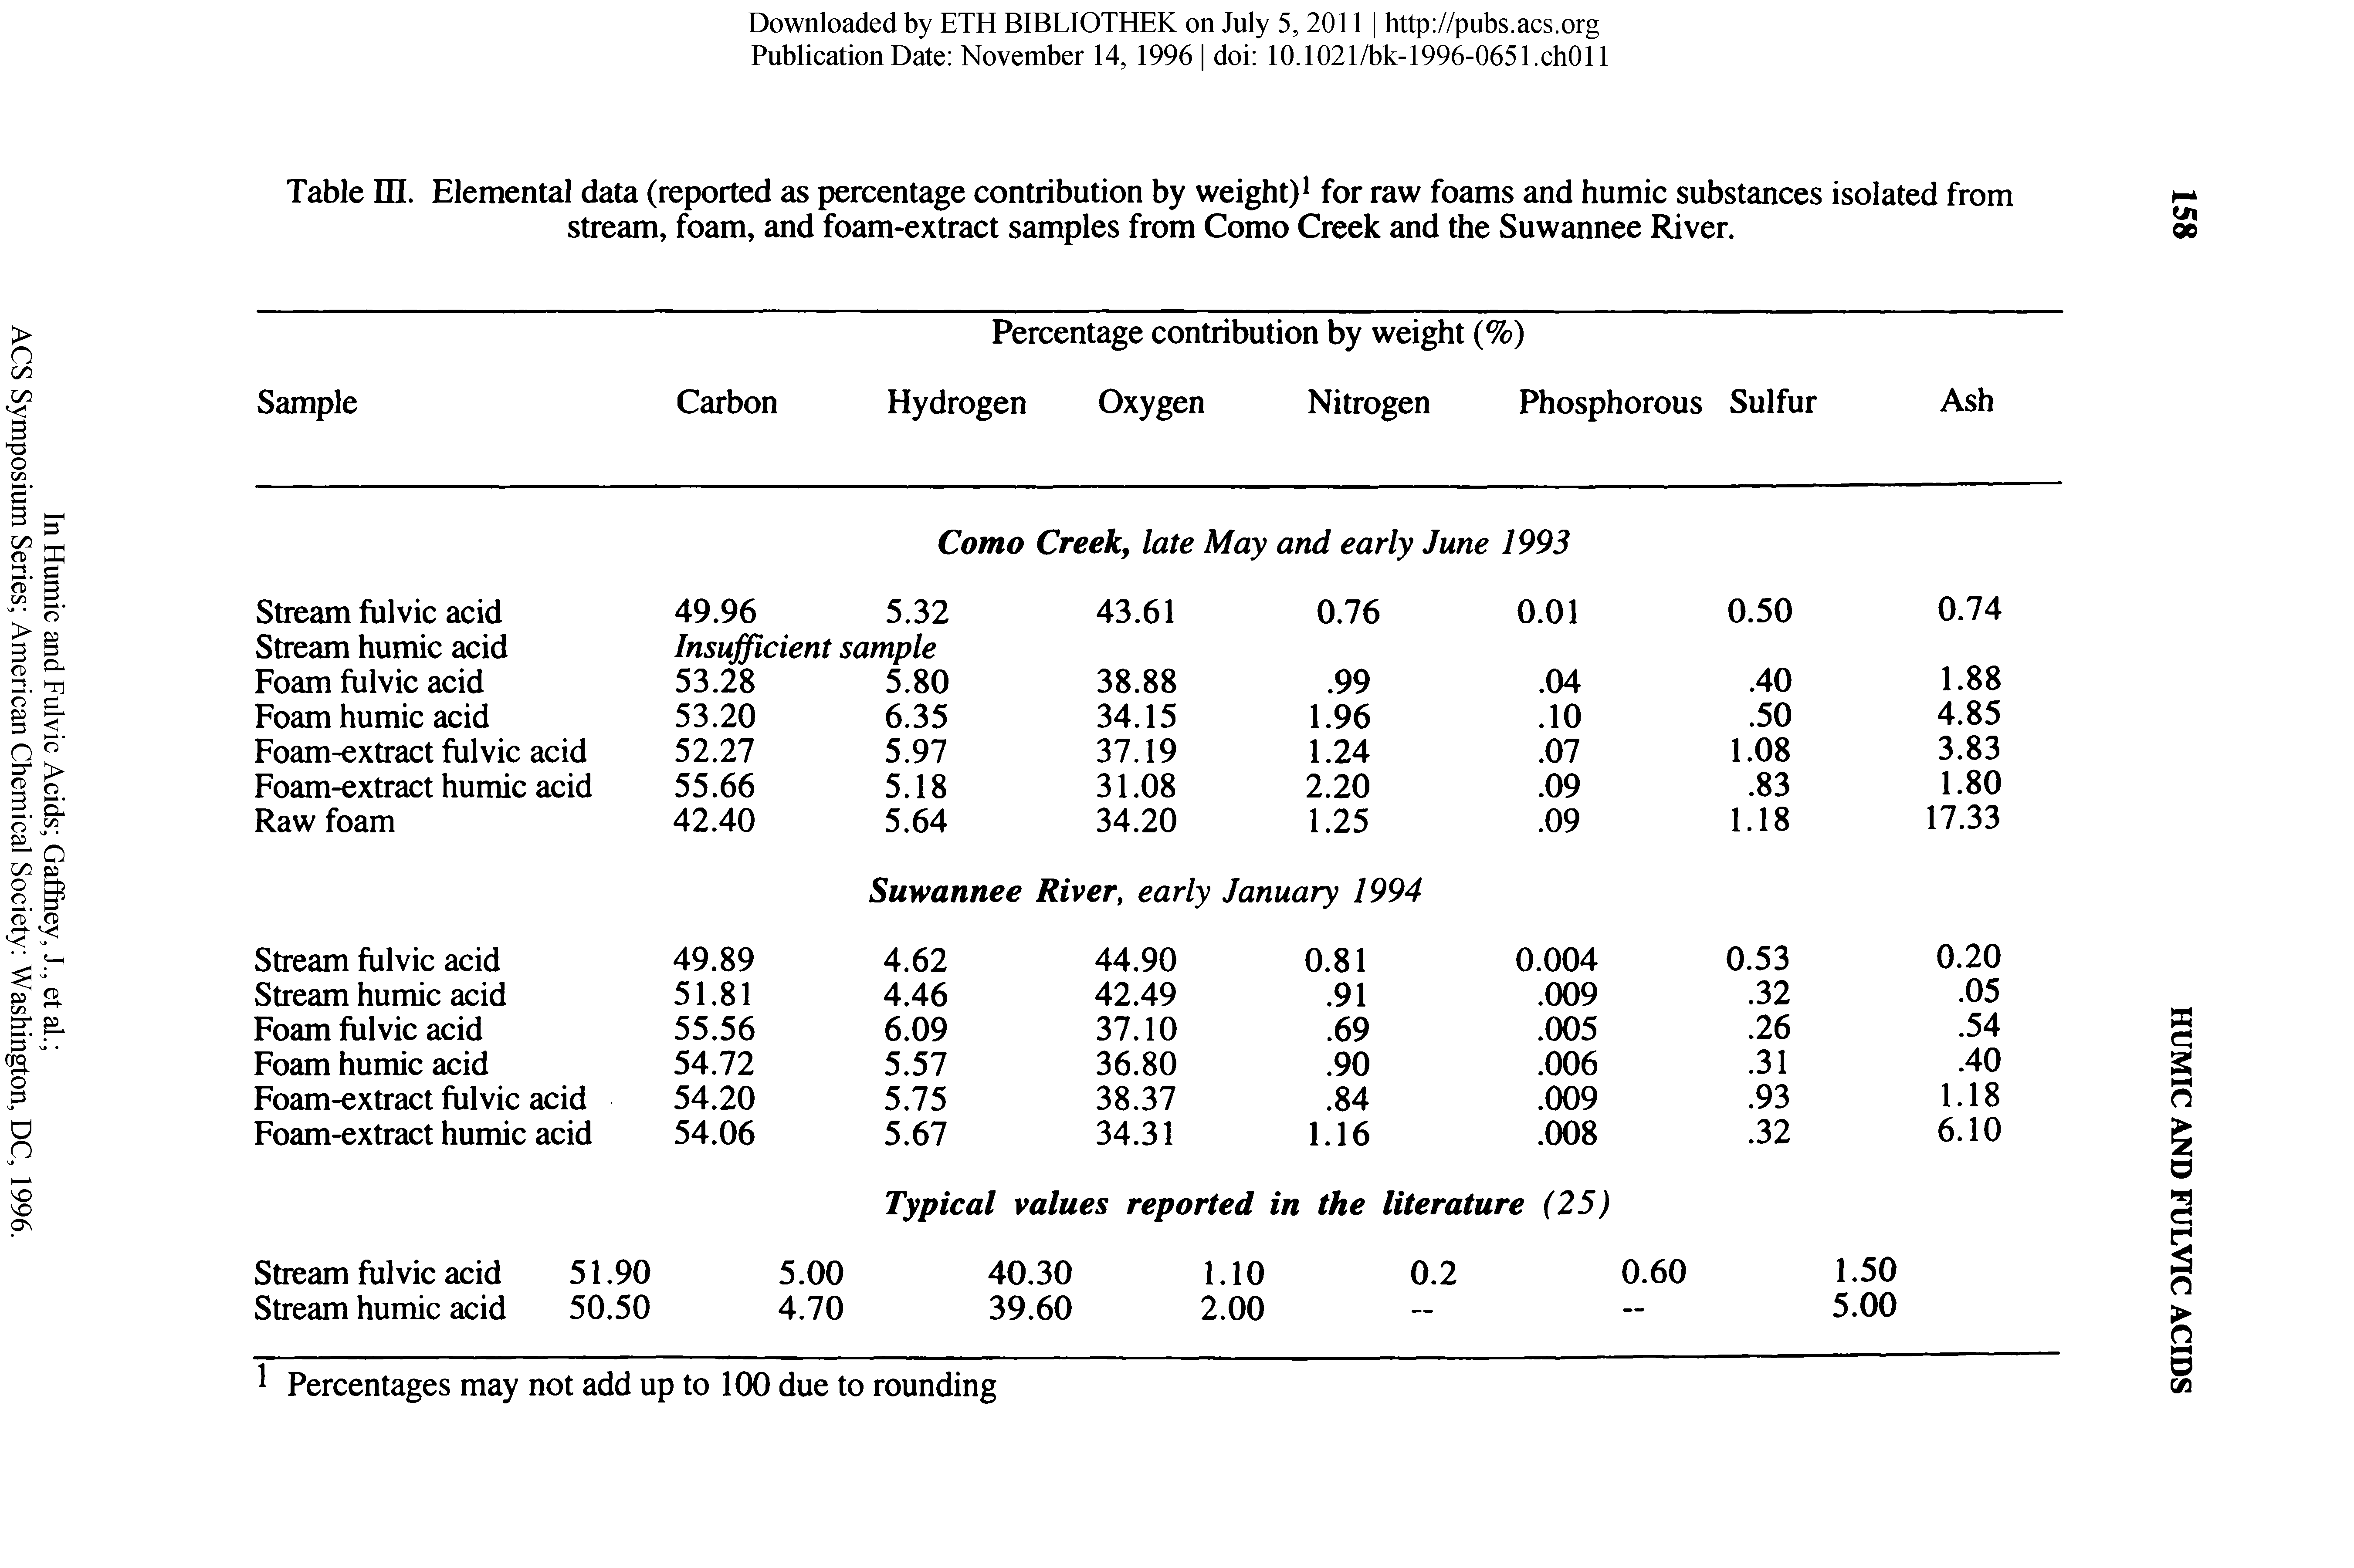 Table III. Elemental data (reported as percentage contribution by weight) for raw foams and humic substances isolated from stream, foam, and foam-extract samples from Como Creek and the Suwannee River.